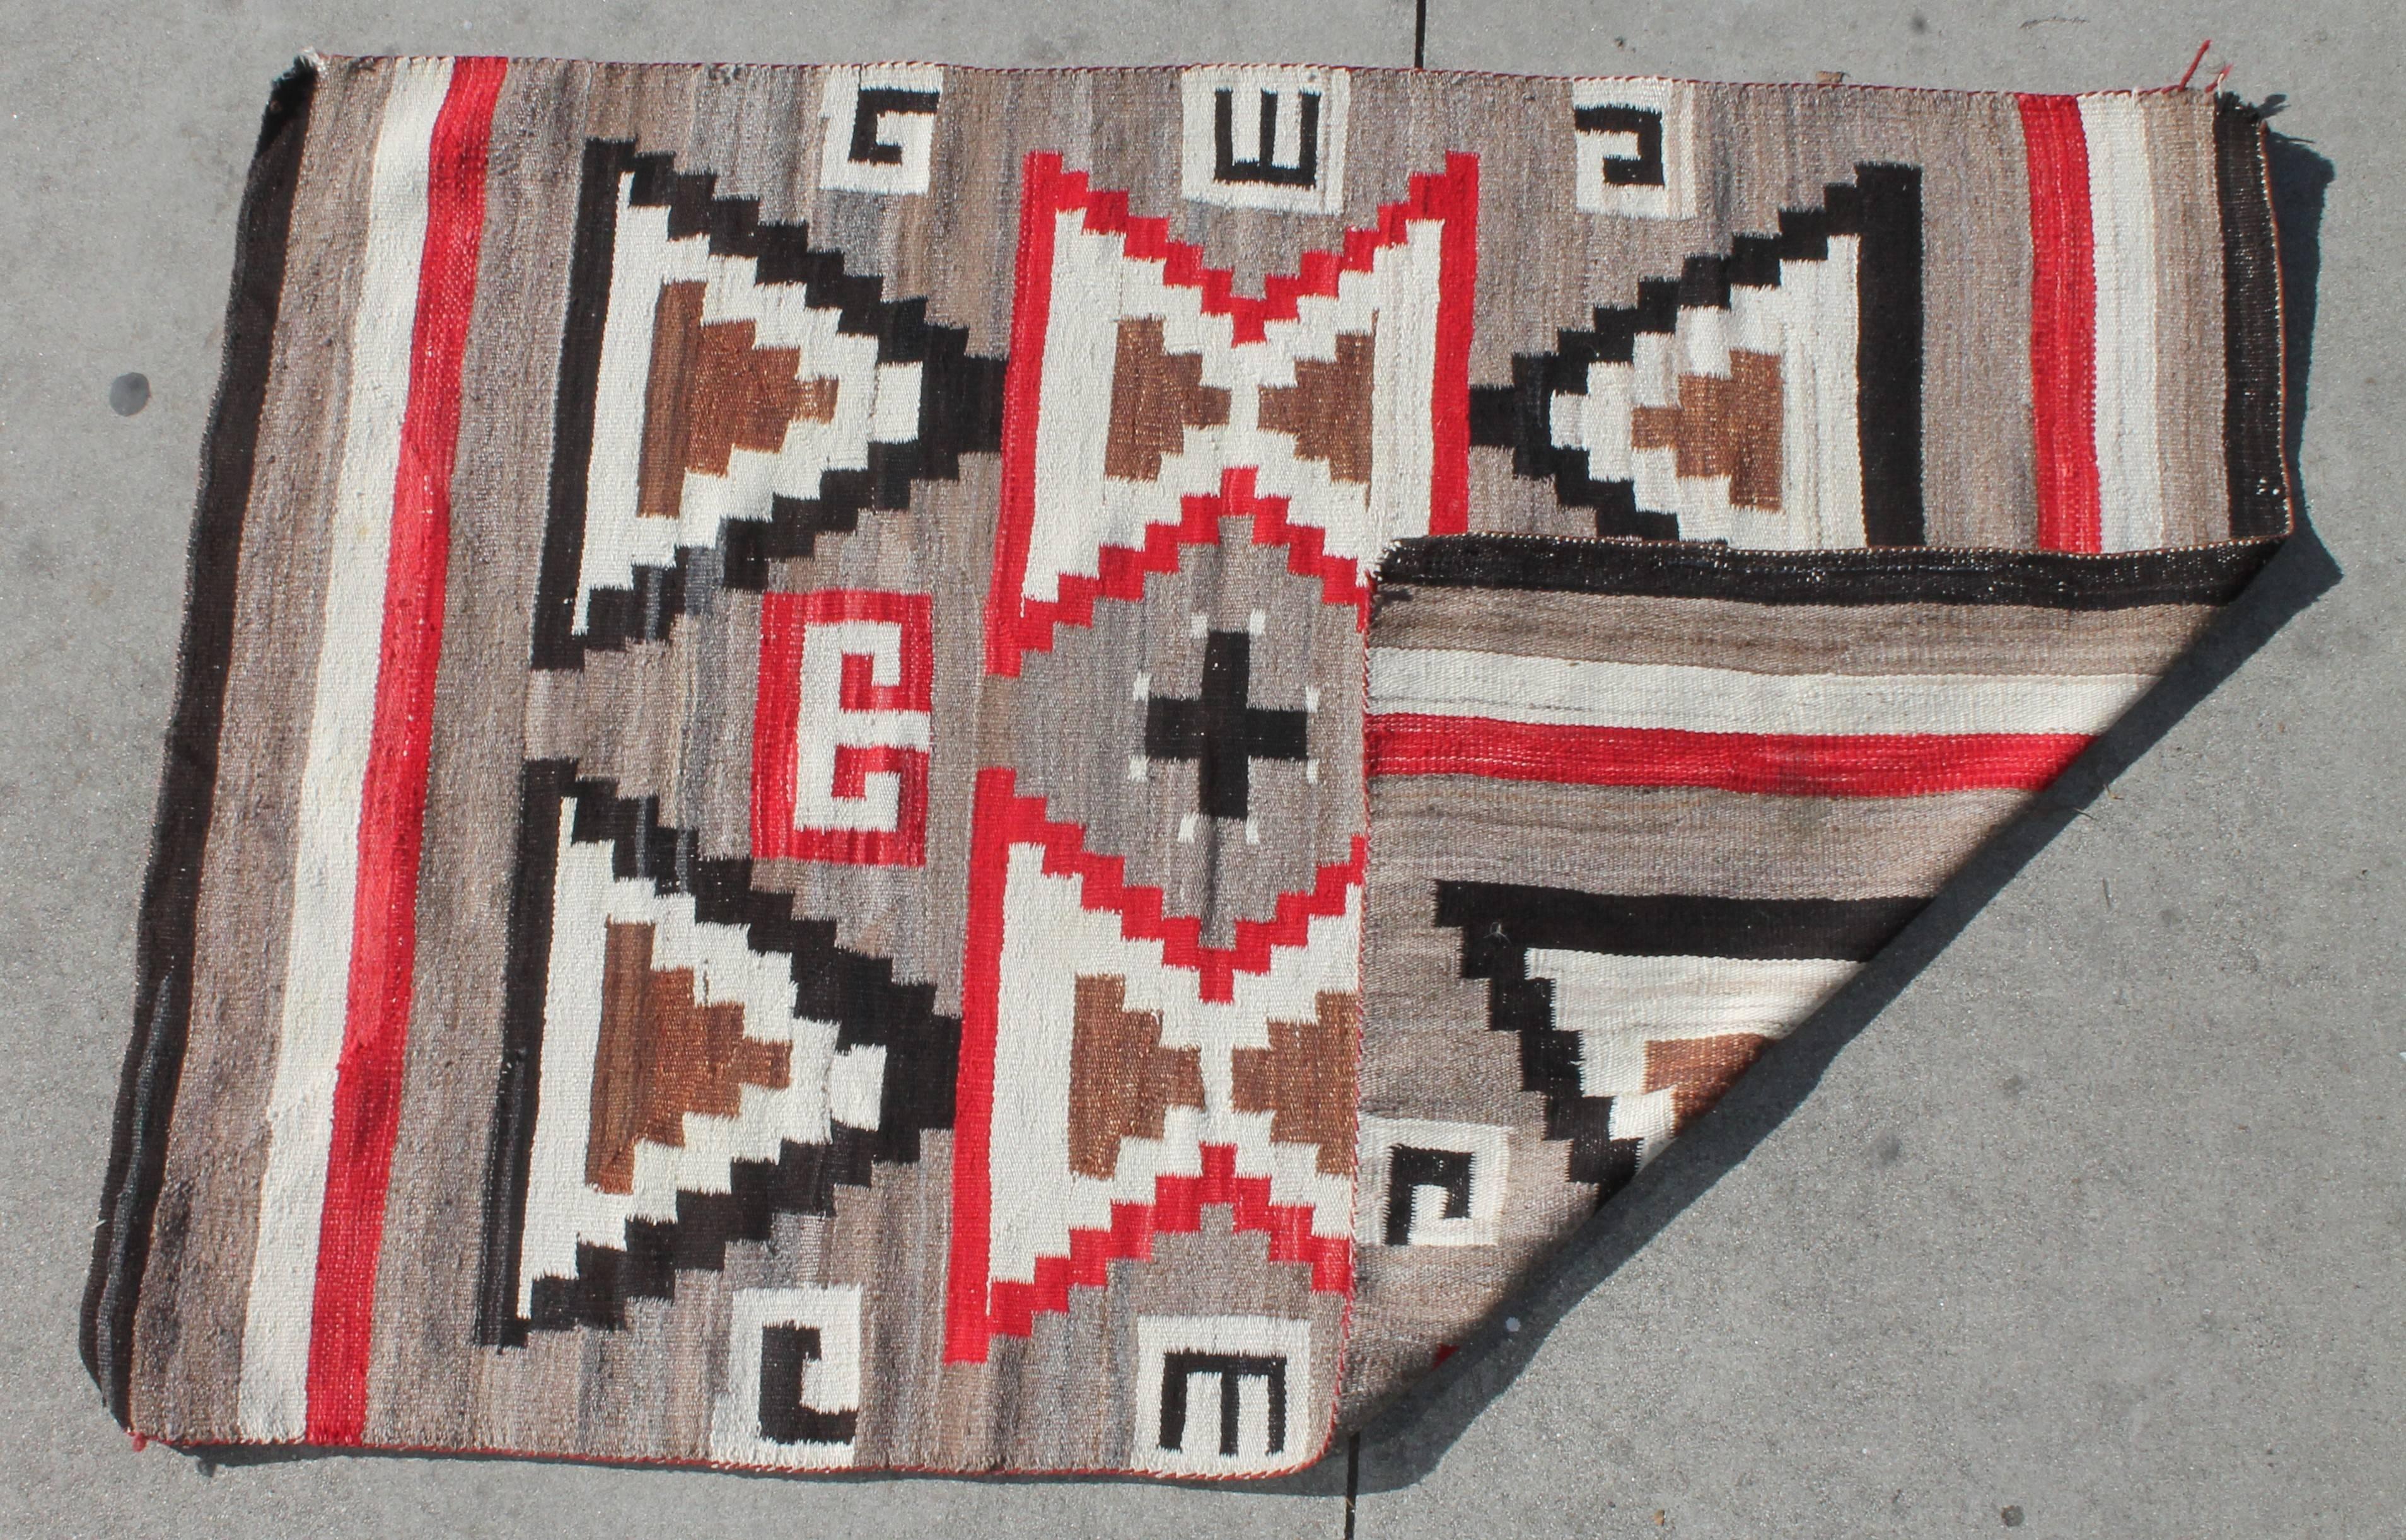 Navajo Indian weaving in amazing condition. Inward large flying geese pattern with center cross. This item has wear consistent with age and use. Very tiny old repairs.